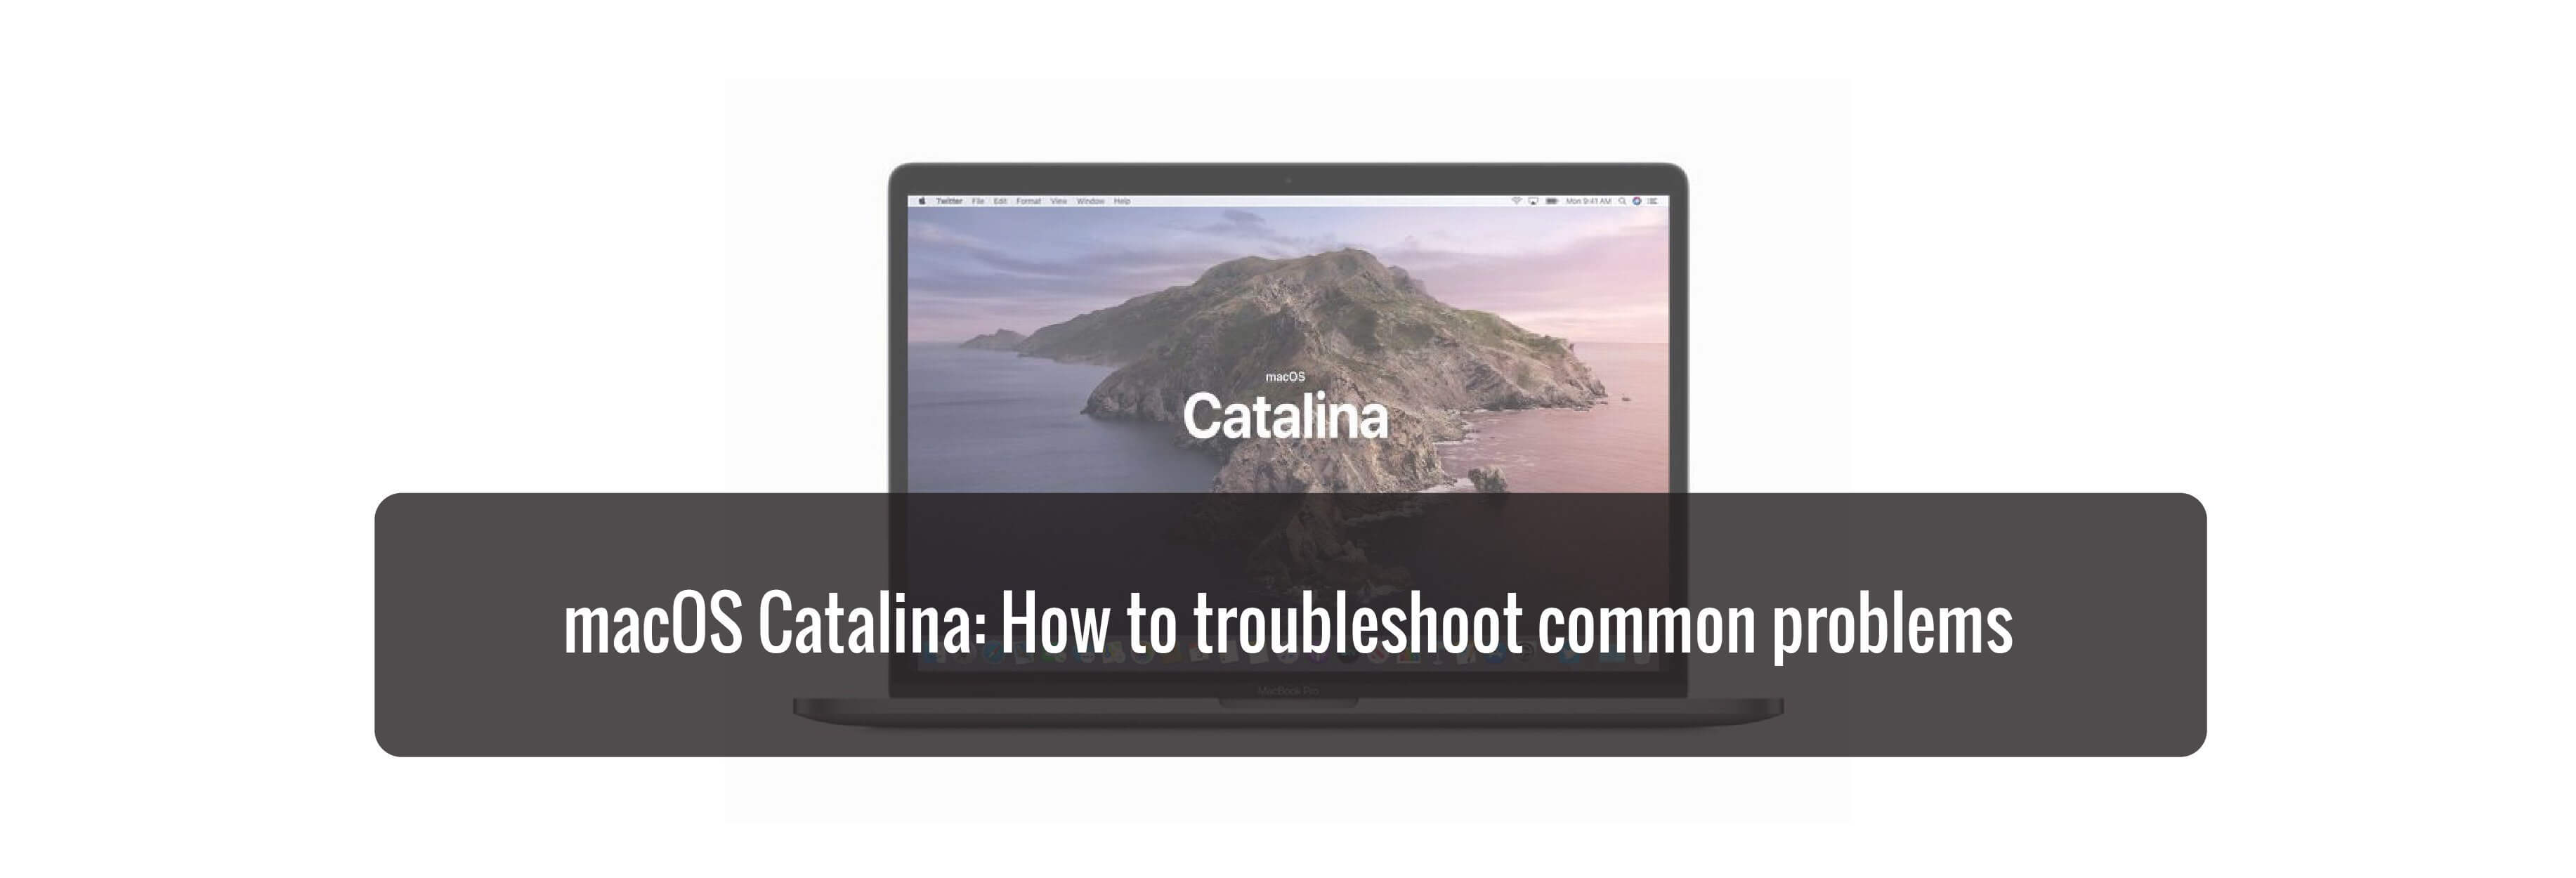 macOS Catalina: How to troubleshoot common problems